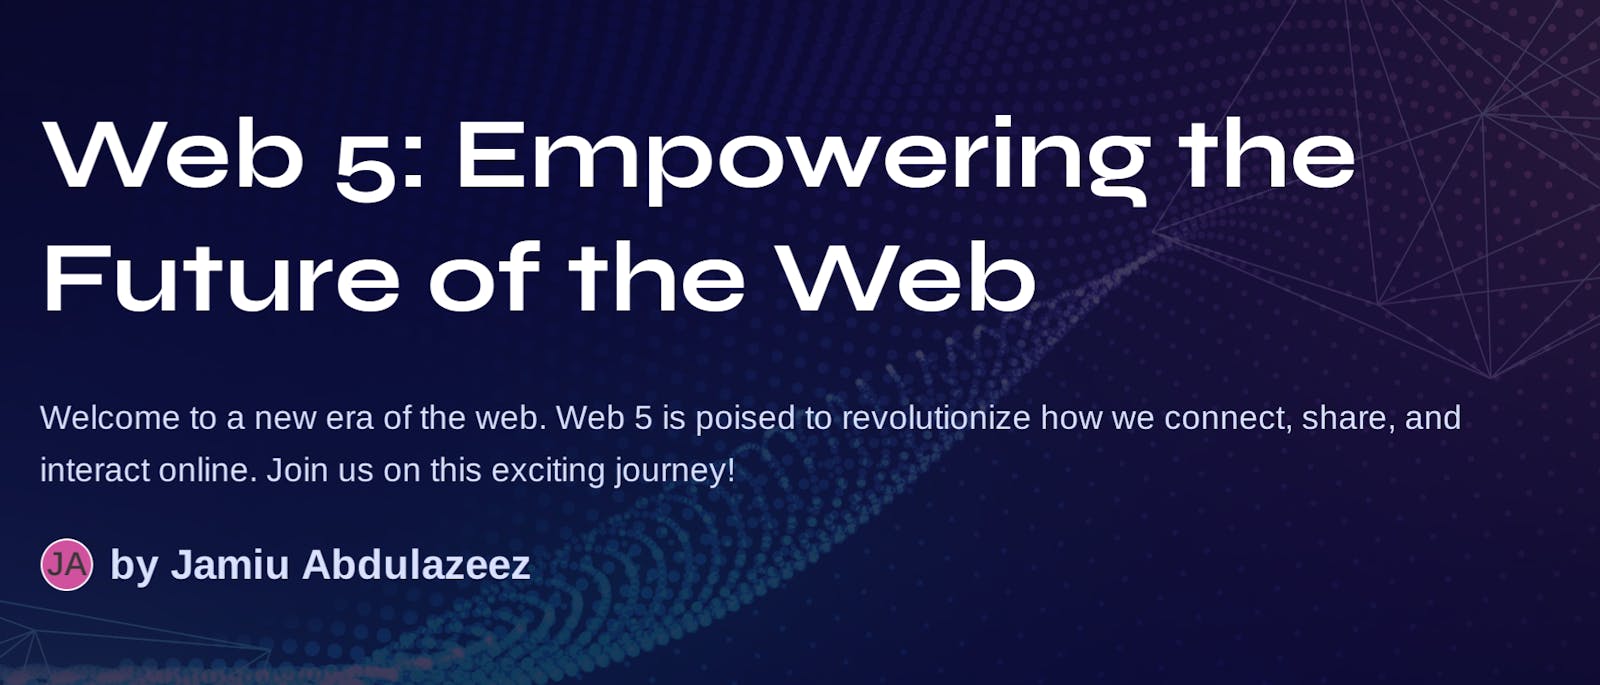 Title: "Web 5: Empowering the Future of the Web"